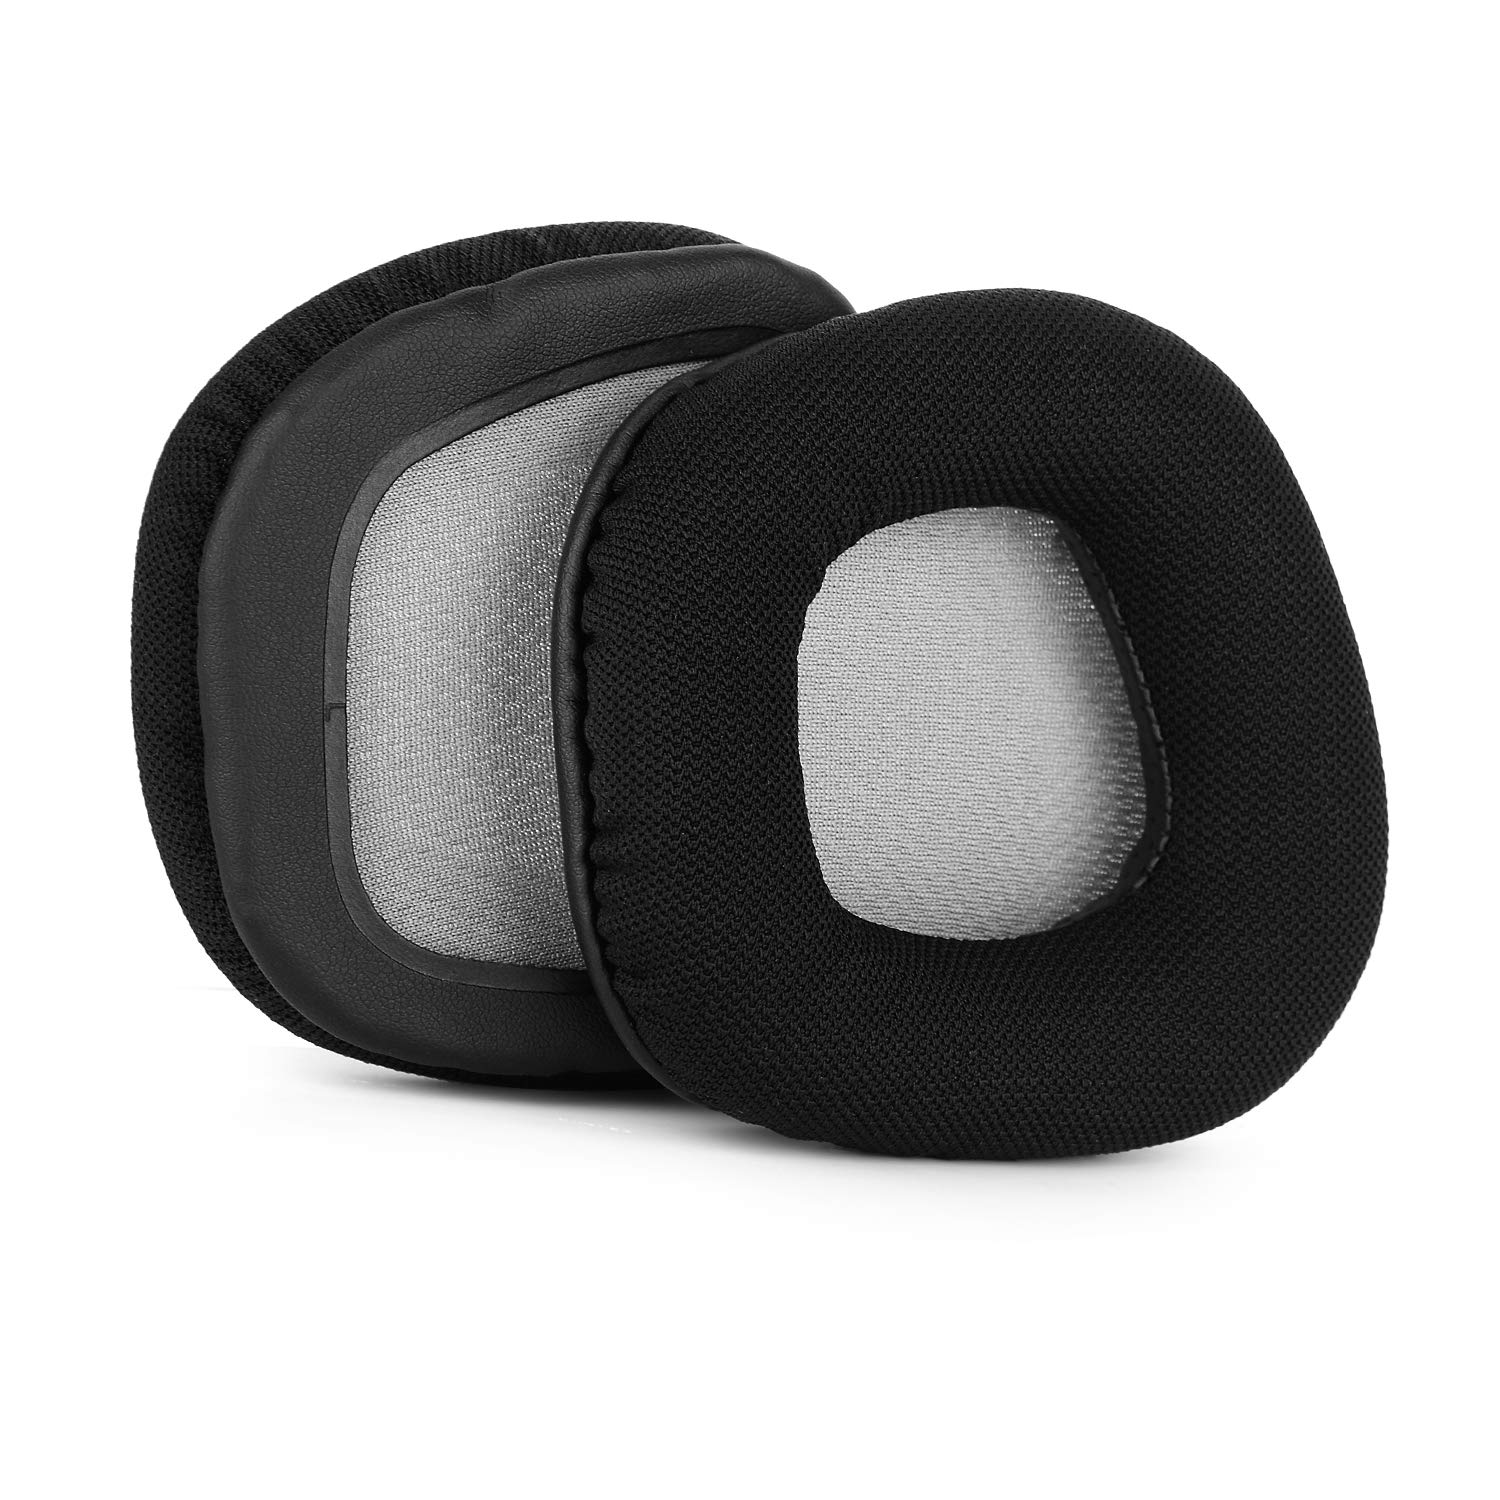 Jecobb Replacement Earpads with Mesh Fabric & Memory Foam Ear Cushion Cover for Corsair Void & Corsair Void PRO RGB Wired/Wireless Gaming Headset ONLY (Black/Grey)